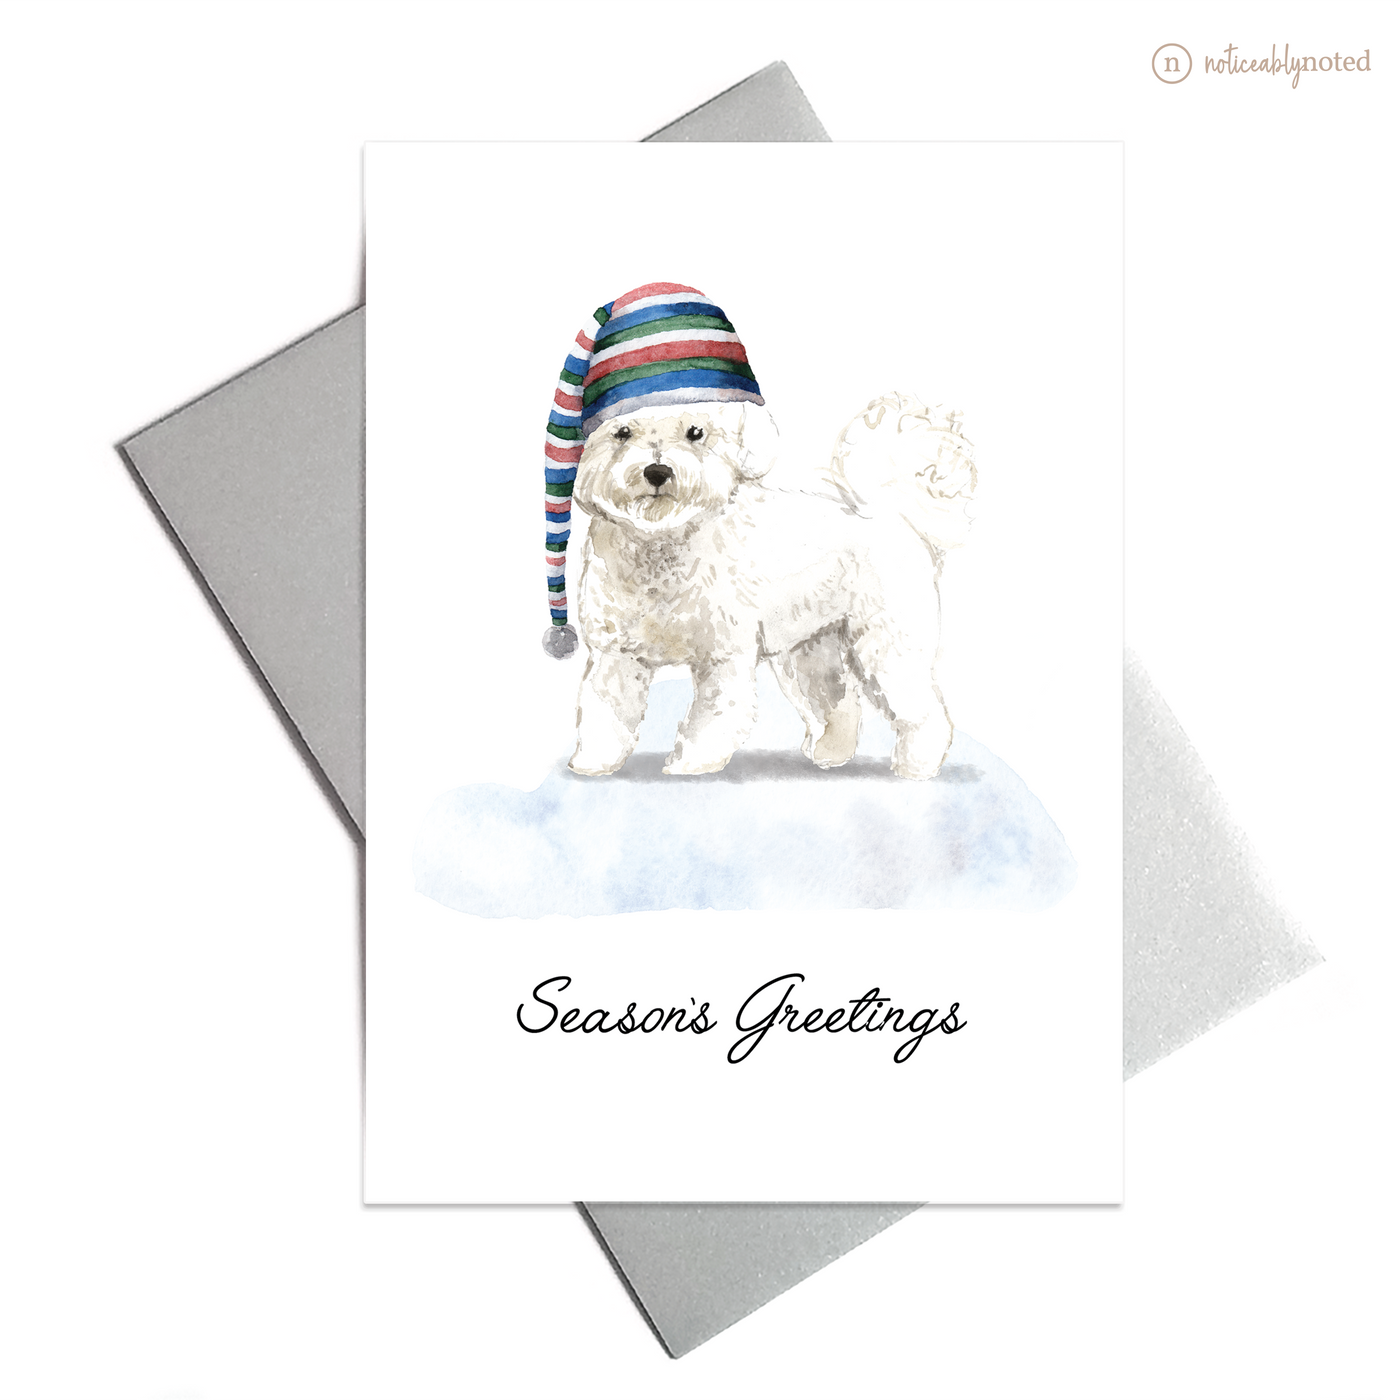 Bichon Frise Dog Holiday Card | Noticeably Noted